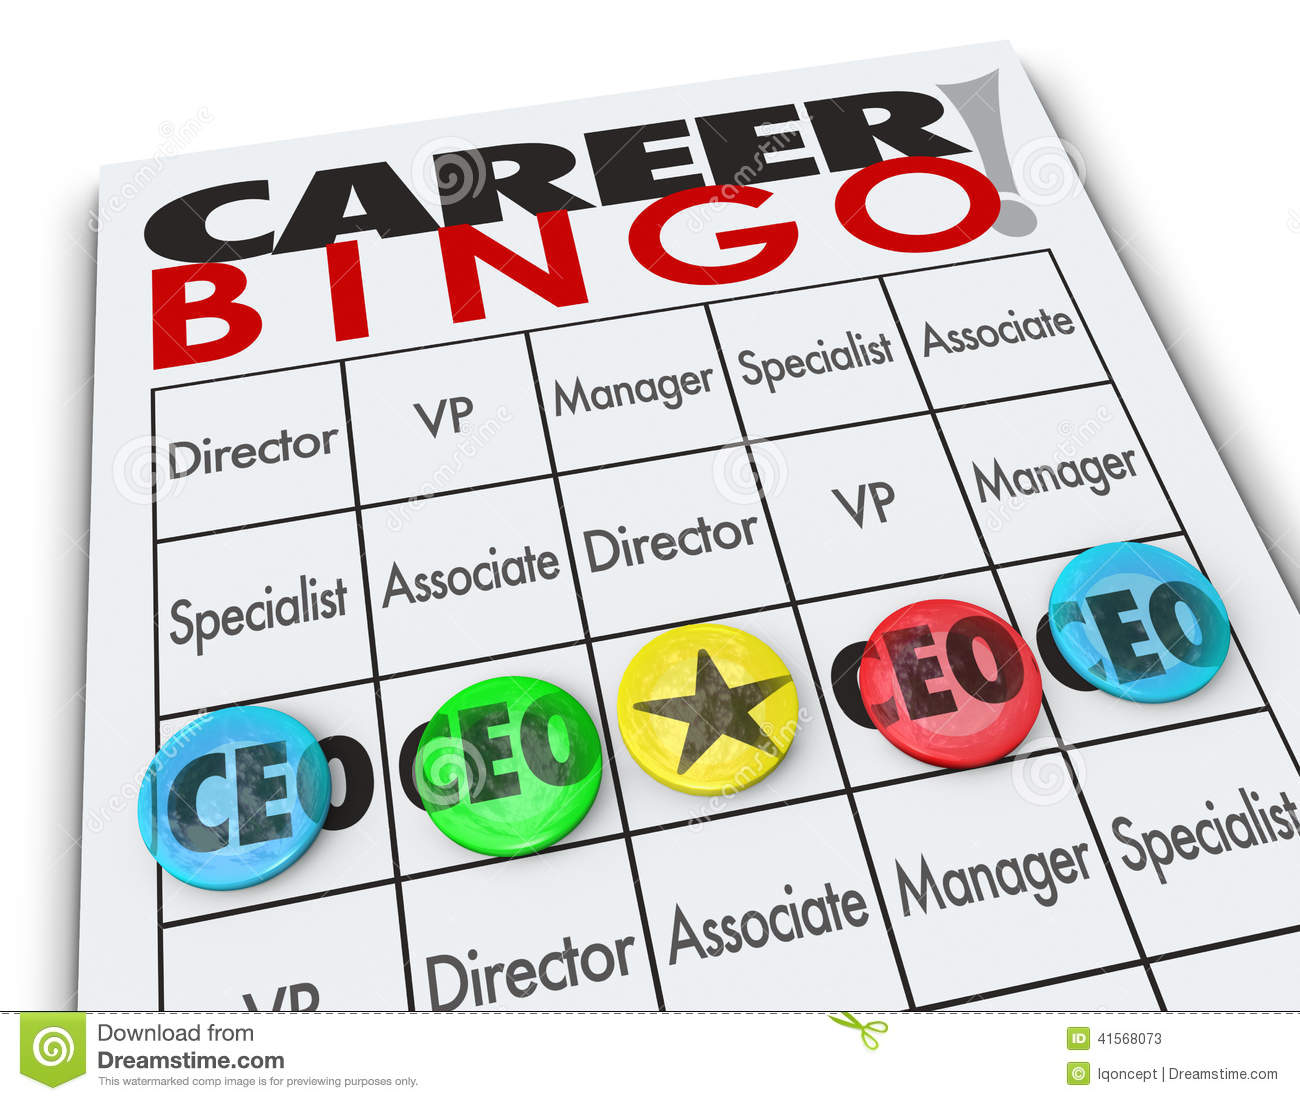 Ceo Or Chief Executive Officer Word On A Career Bingo Card Or Game